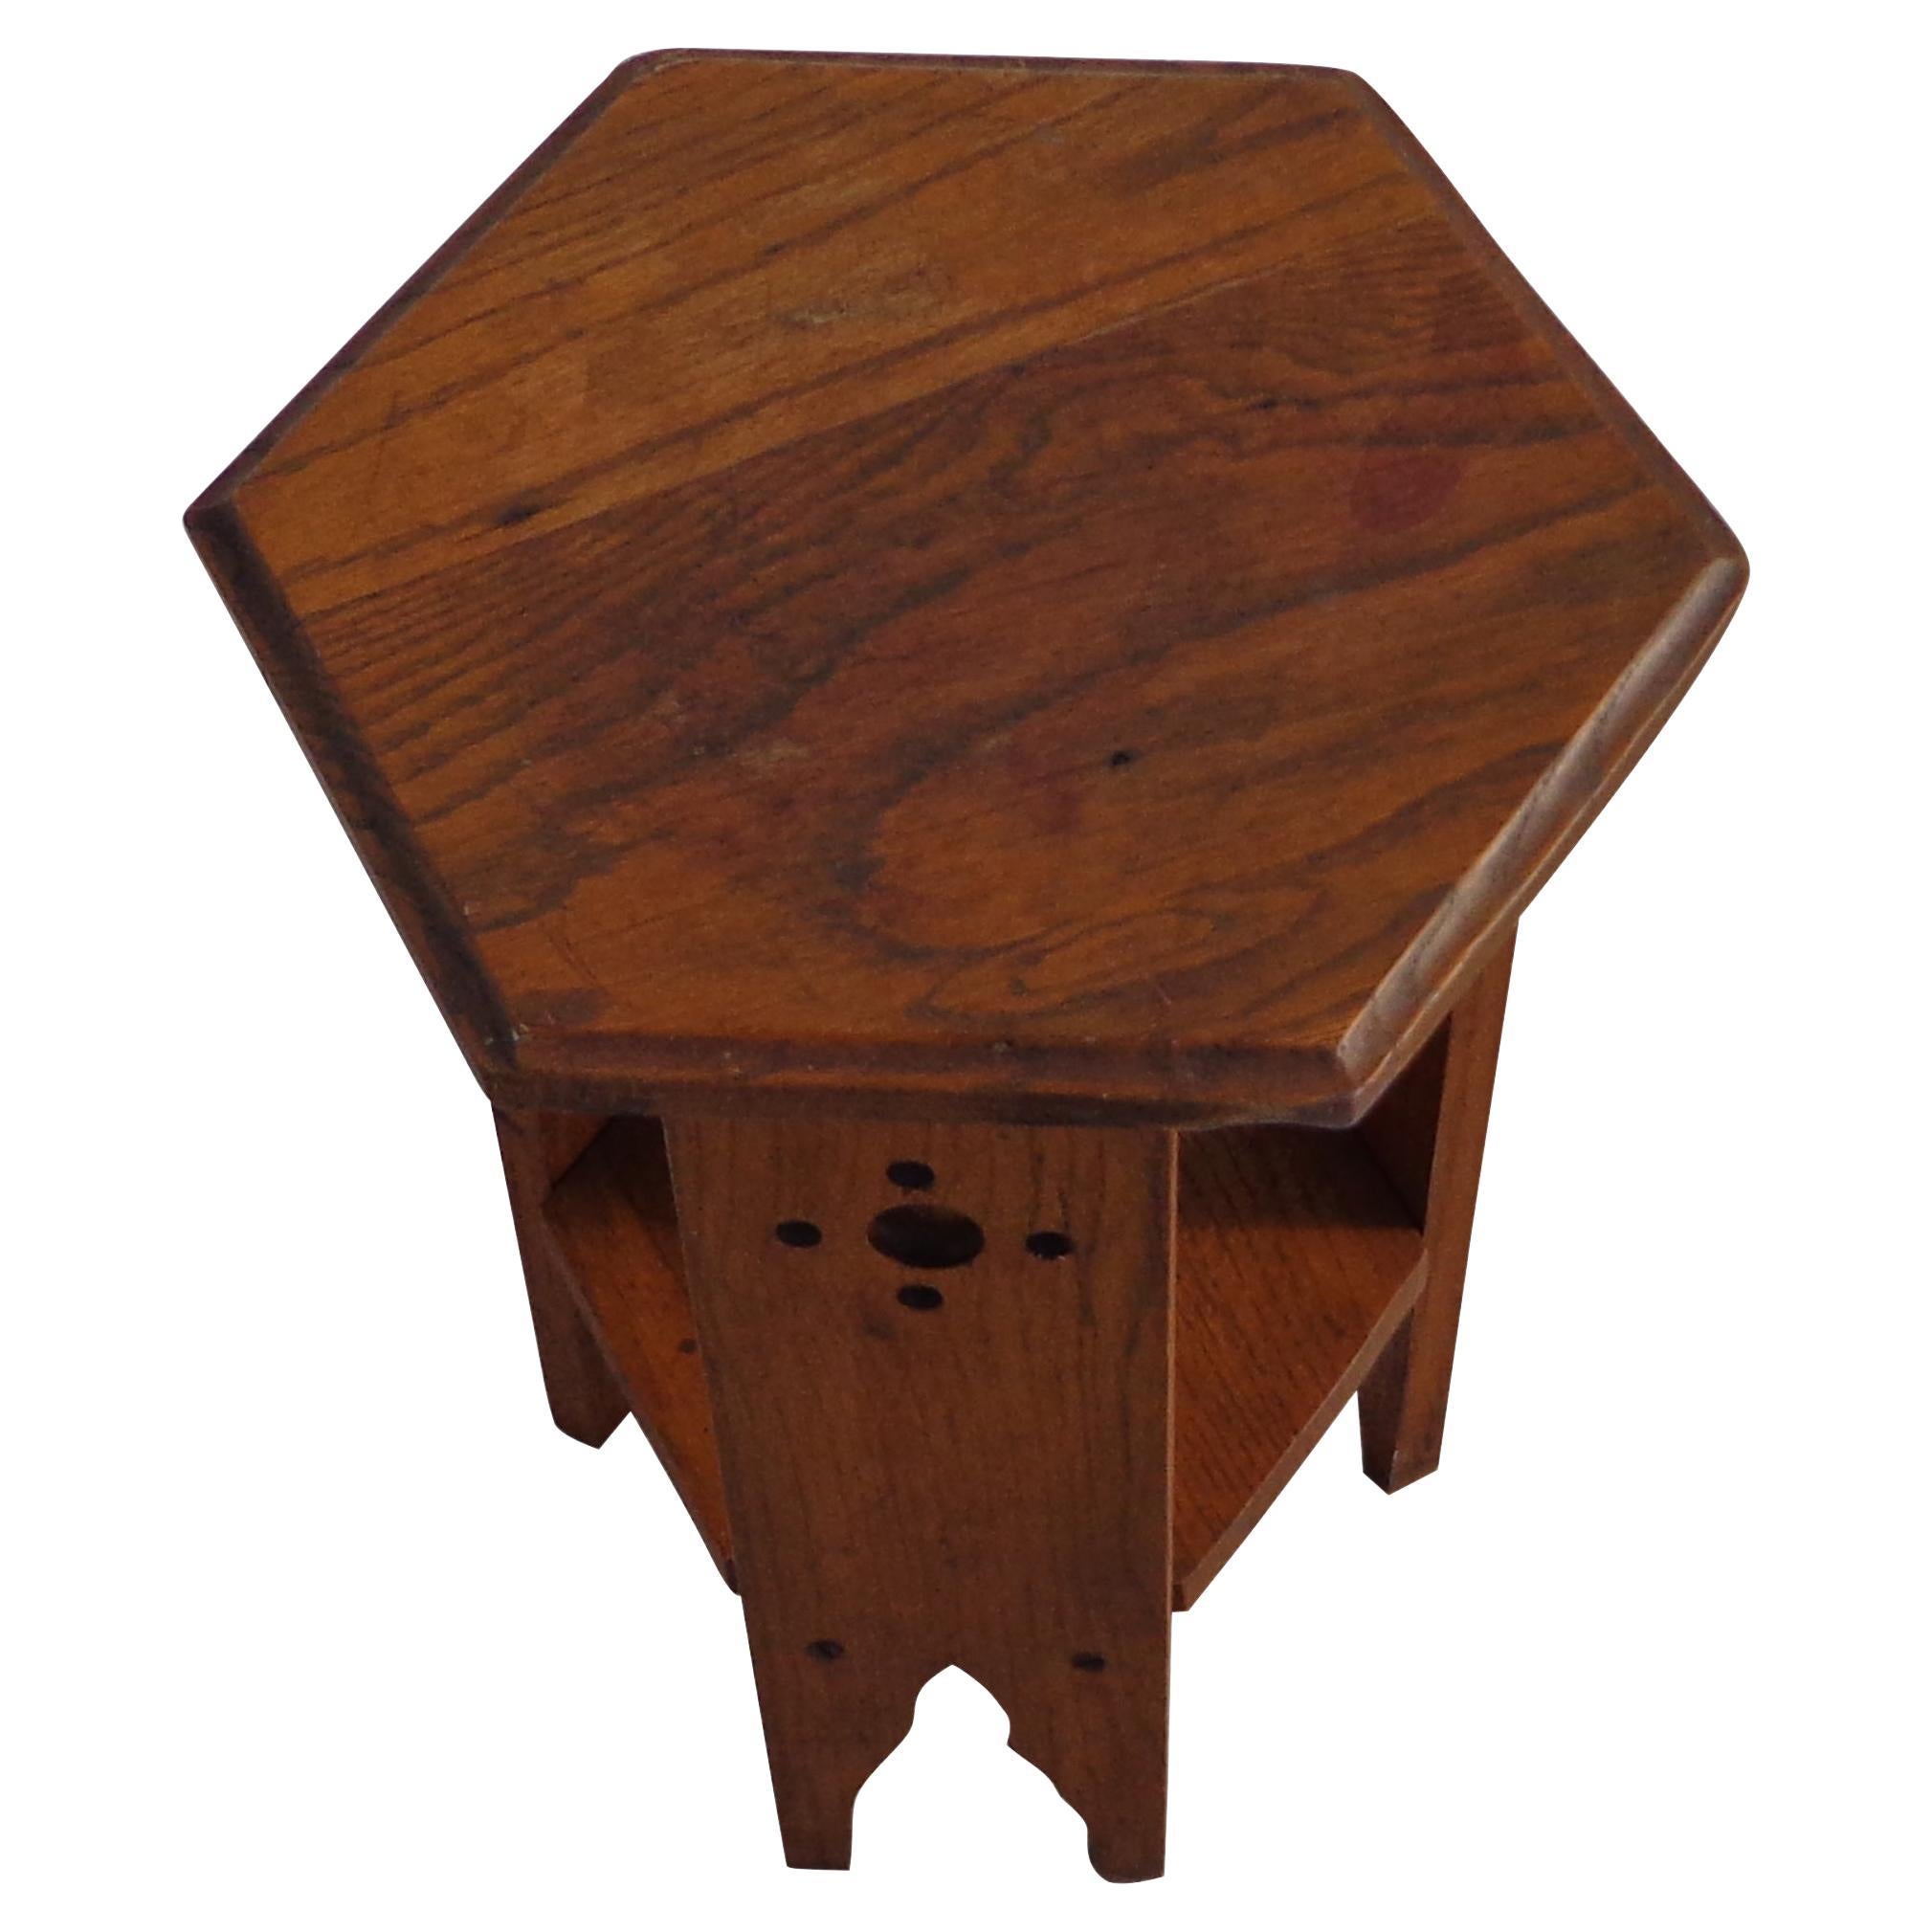 13.5? Arts & Crafts side table

Arts & Crafts octagonal top antique side table in oak featuring Moorish design elements.